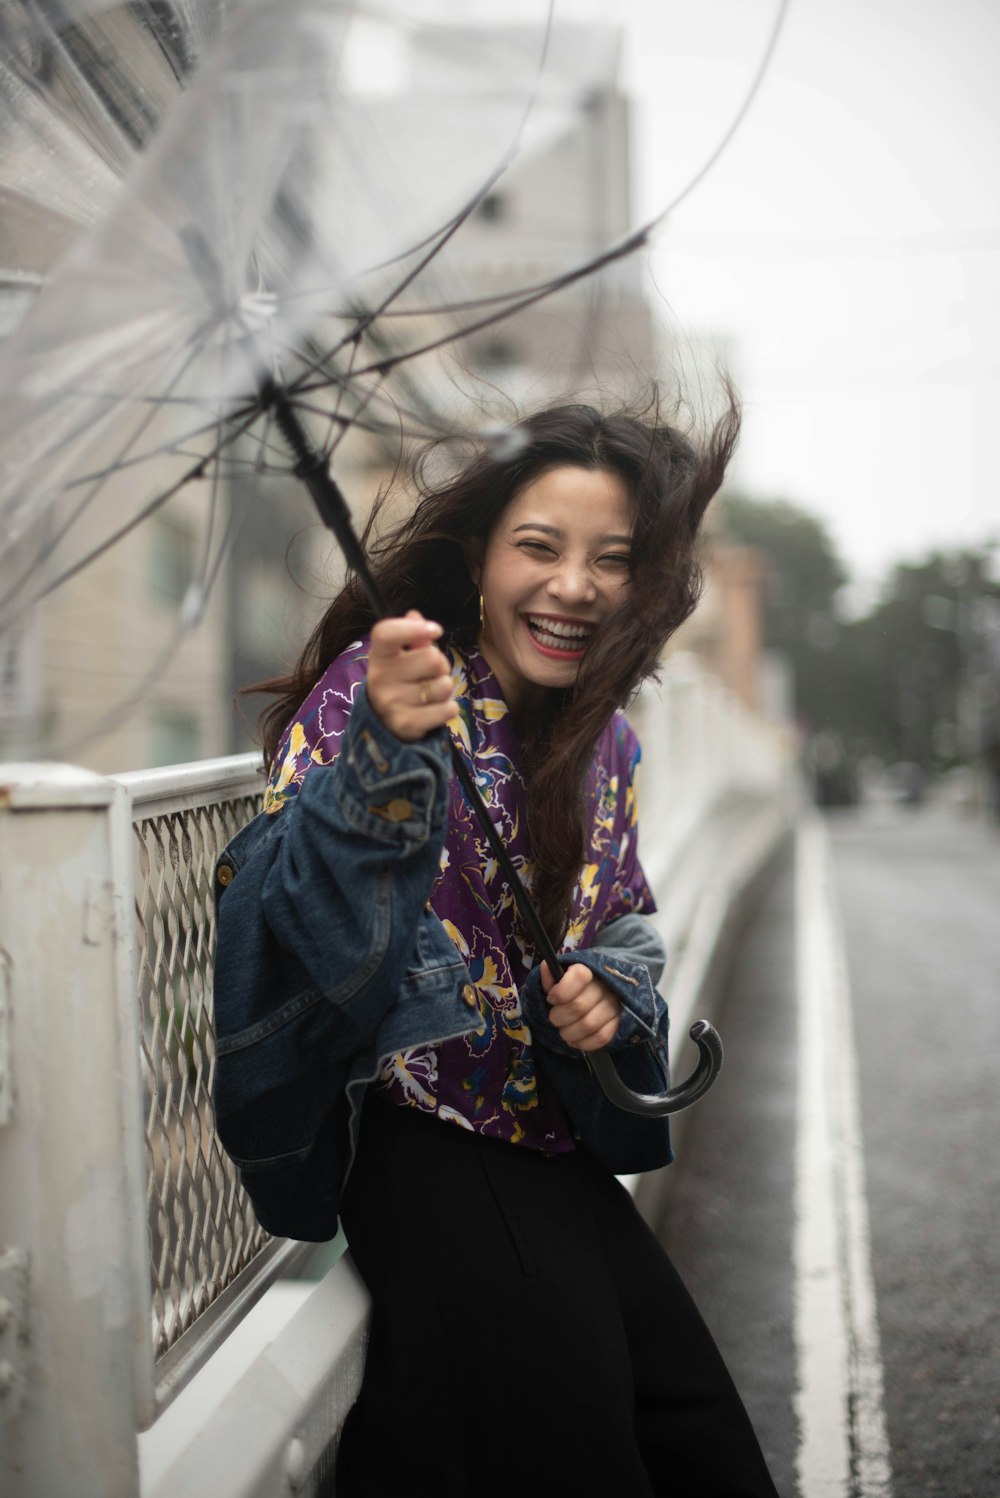 a woman is holding an umbrella and smiling